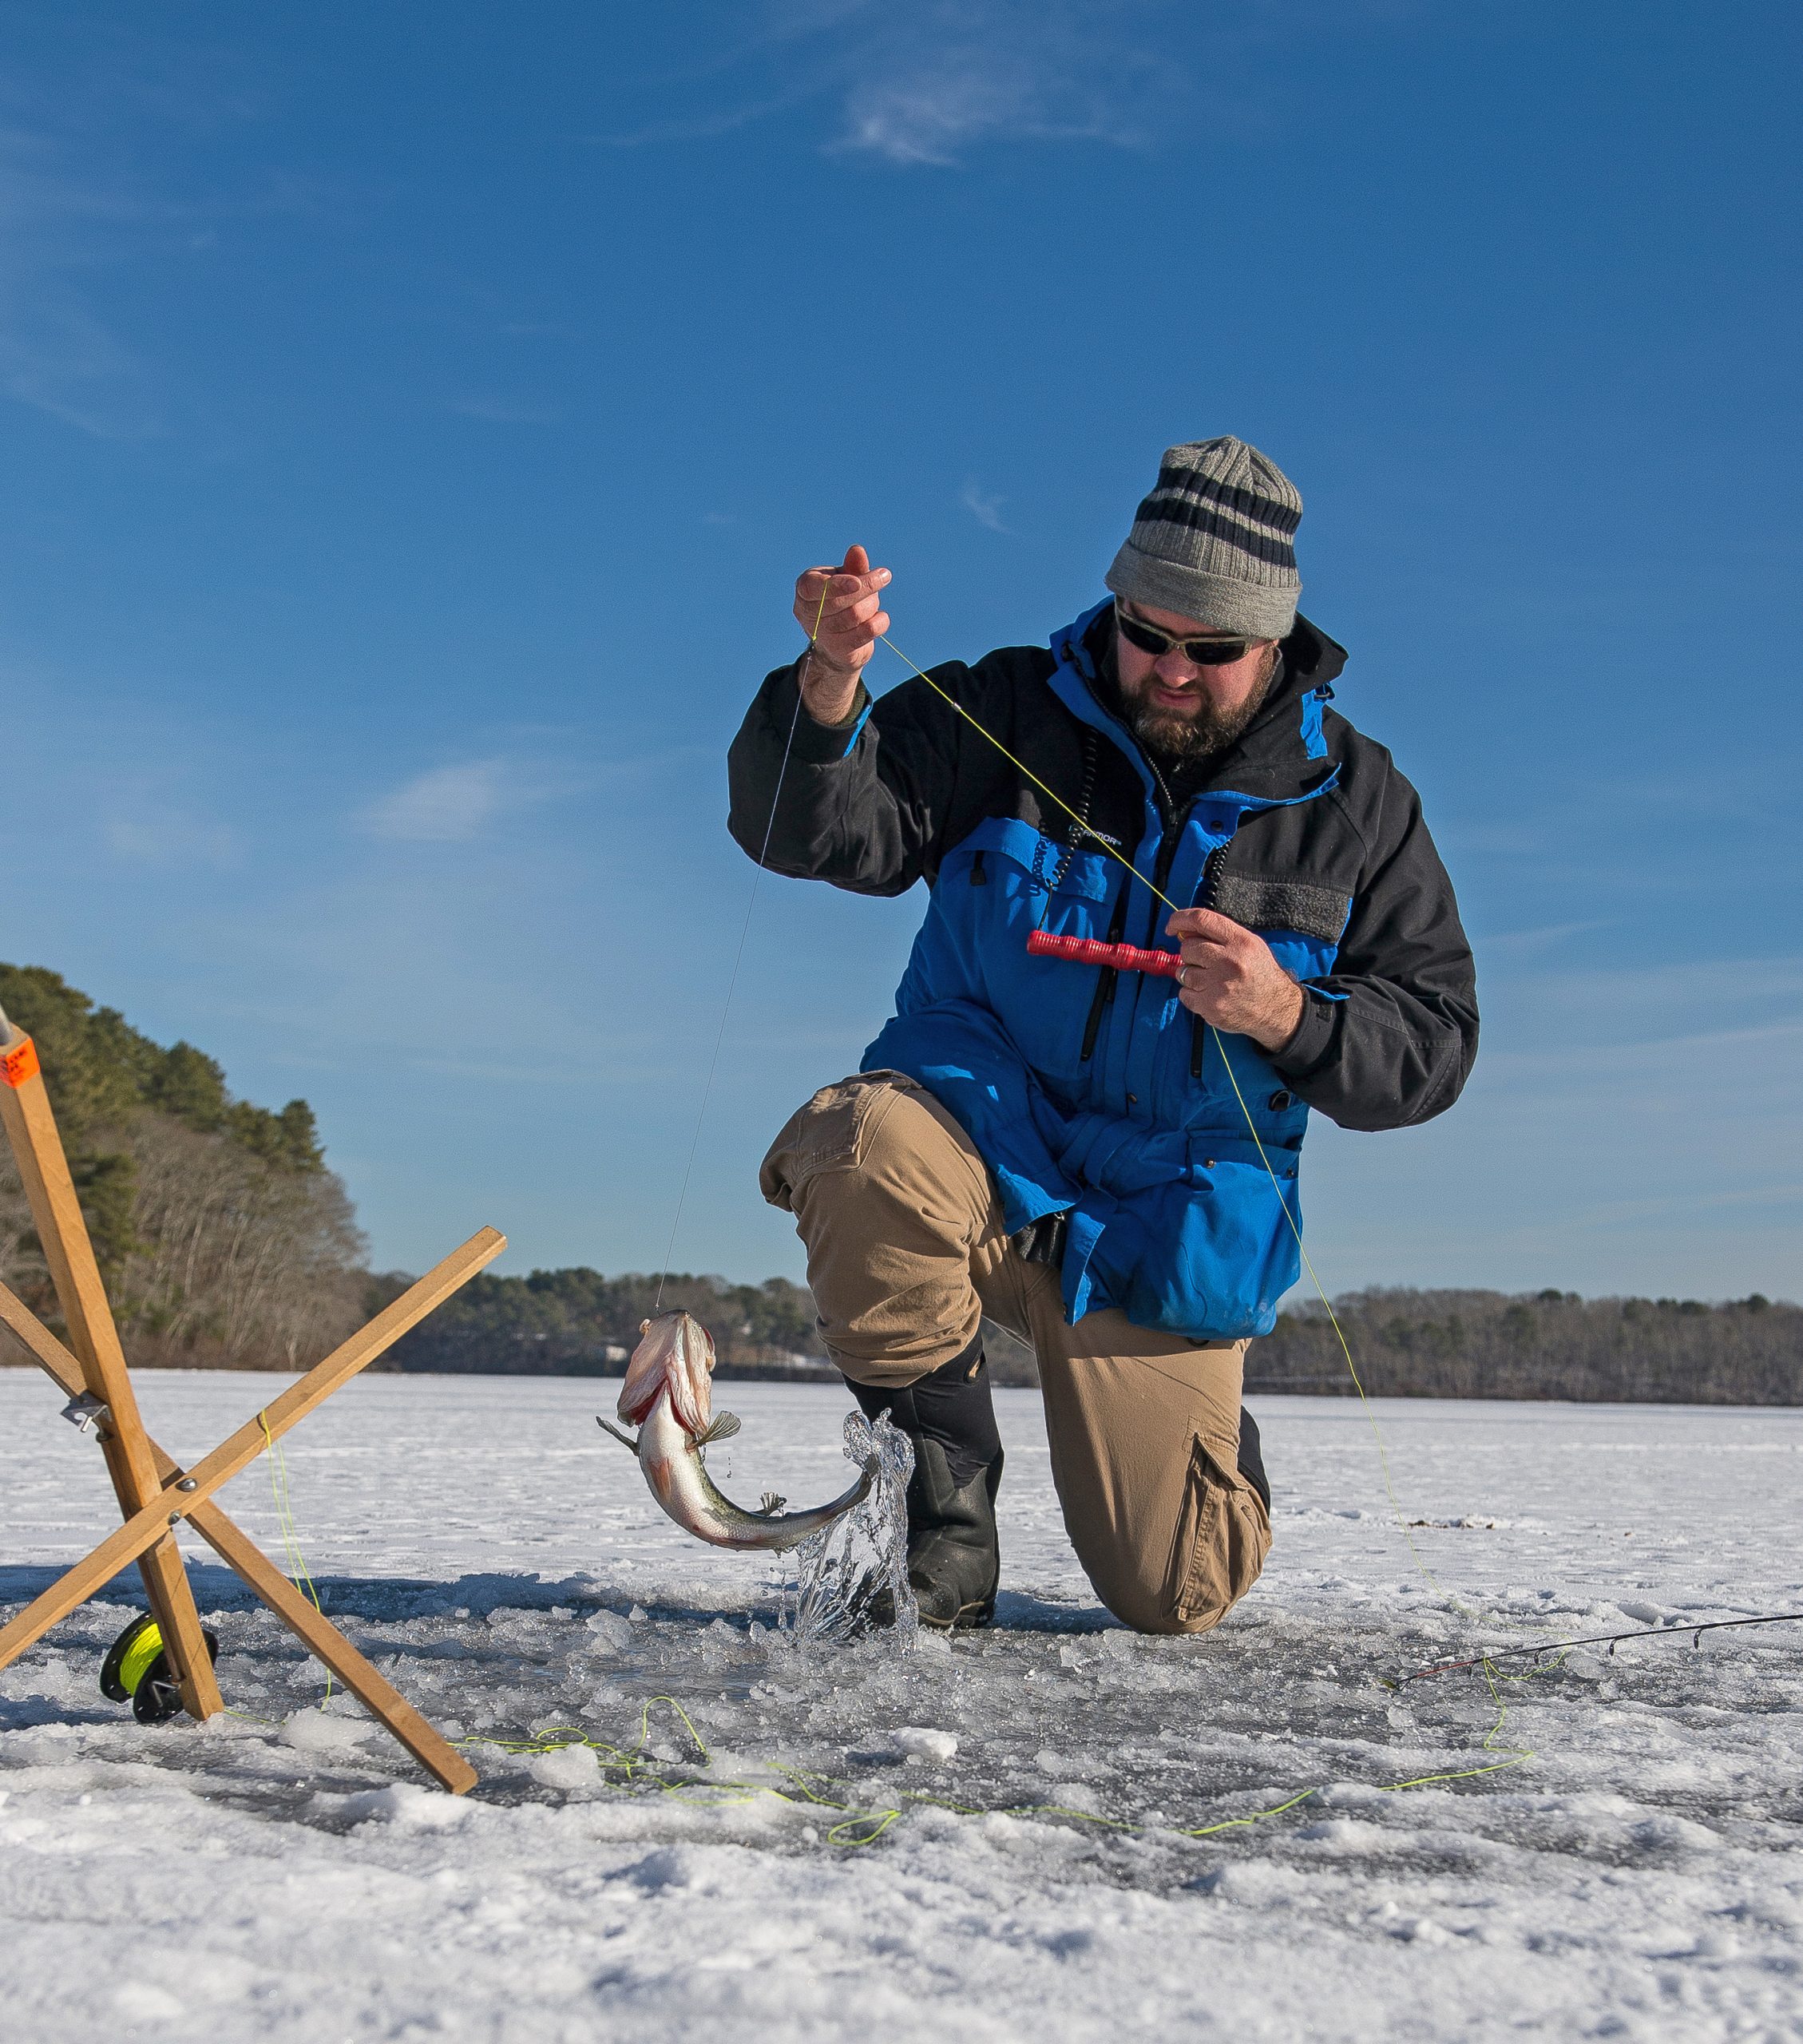 7 Ways to Stay Warm Fishing This Winter - Anchored Outdoors